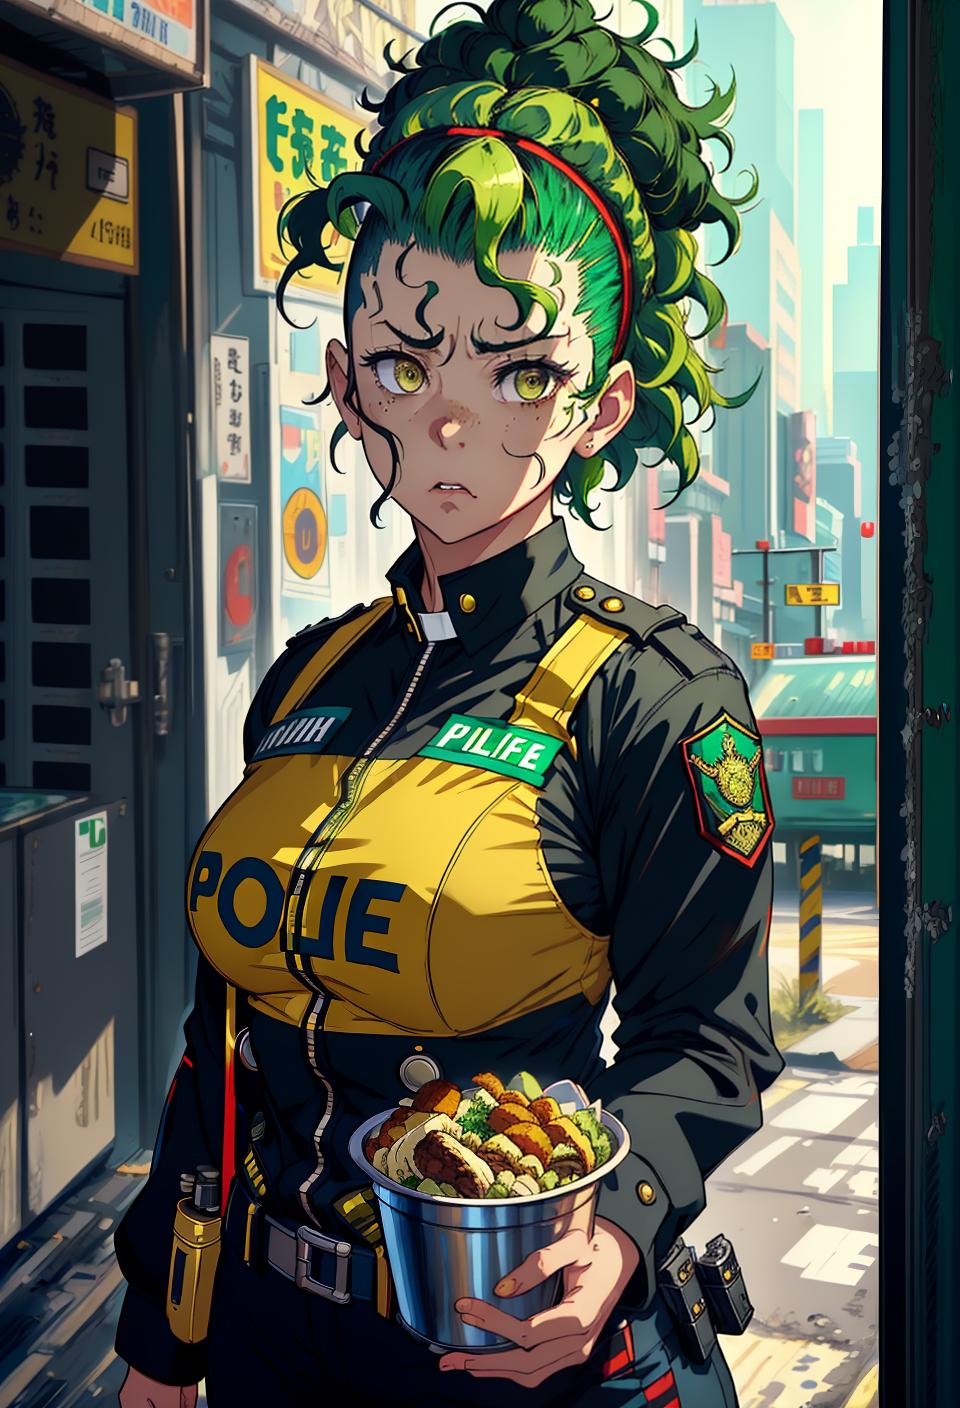  ((trending, highres, masterpiece, cinematic shot)), 1girl, mature, female police uniform, large, eating food, medium-length curly green hair, mohawk hairstyle,  yellow eyes, shy personality, worried expression, red skin, epic, clever